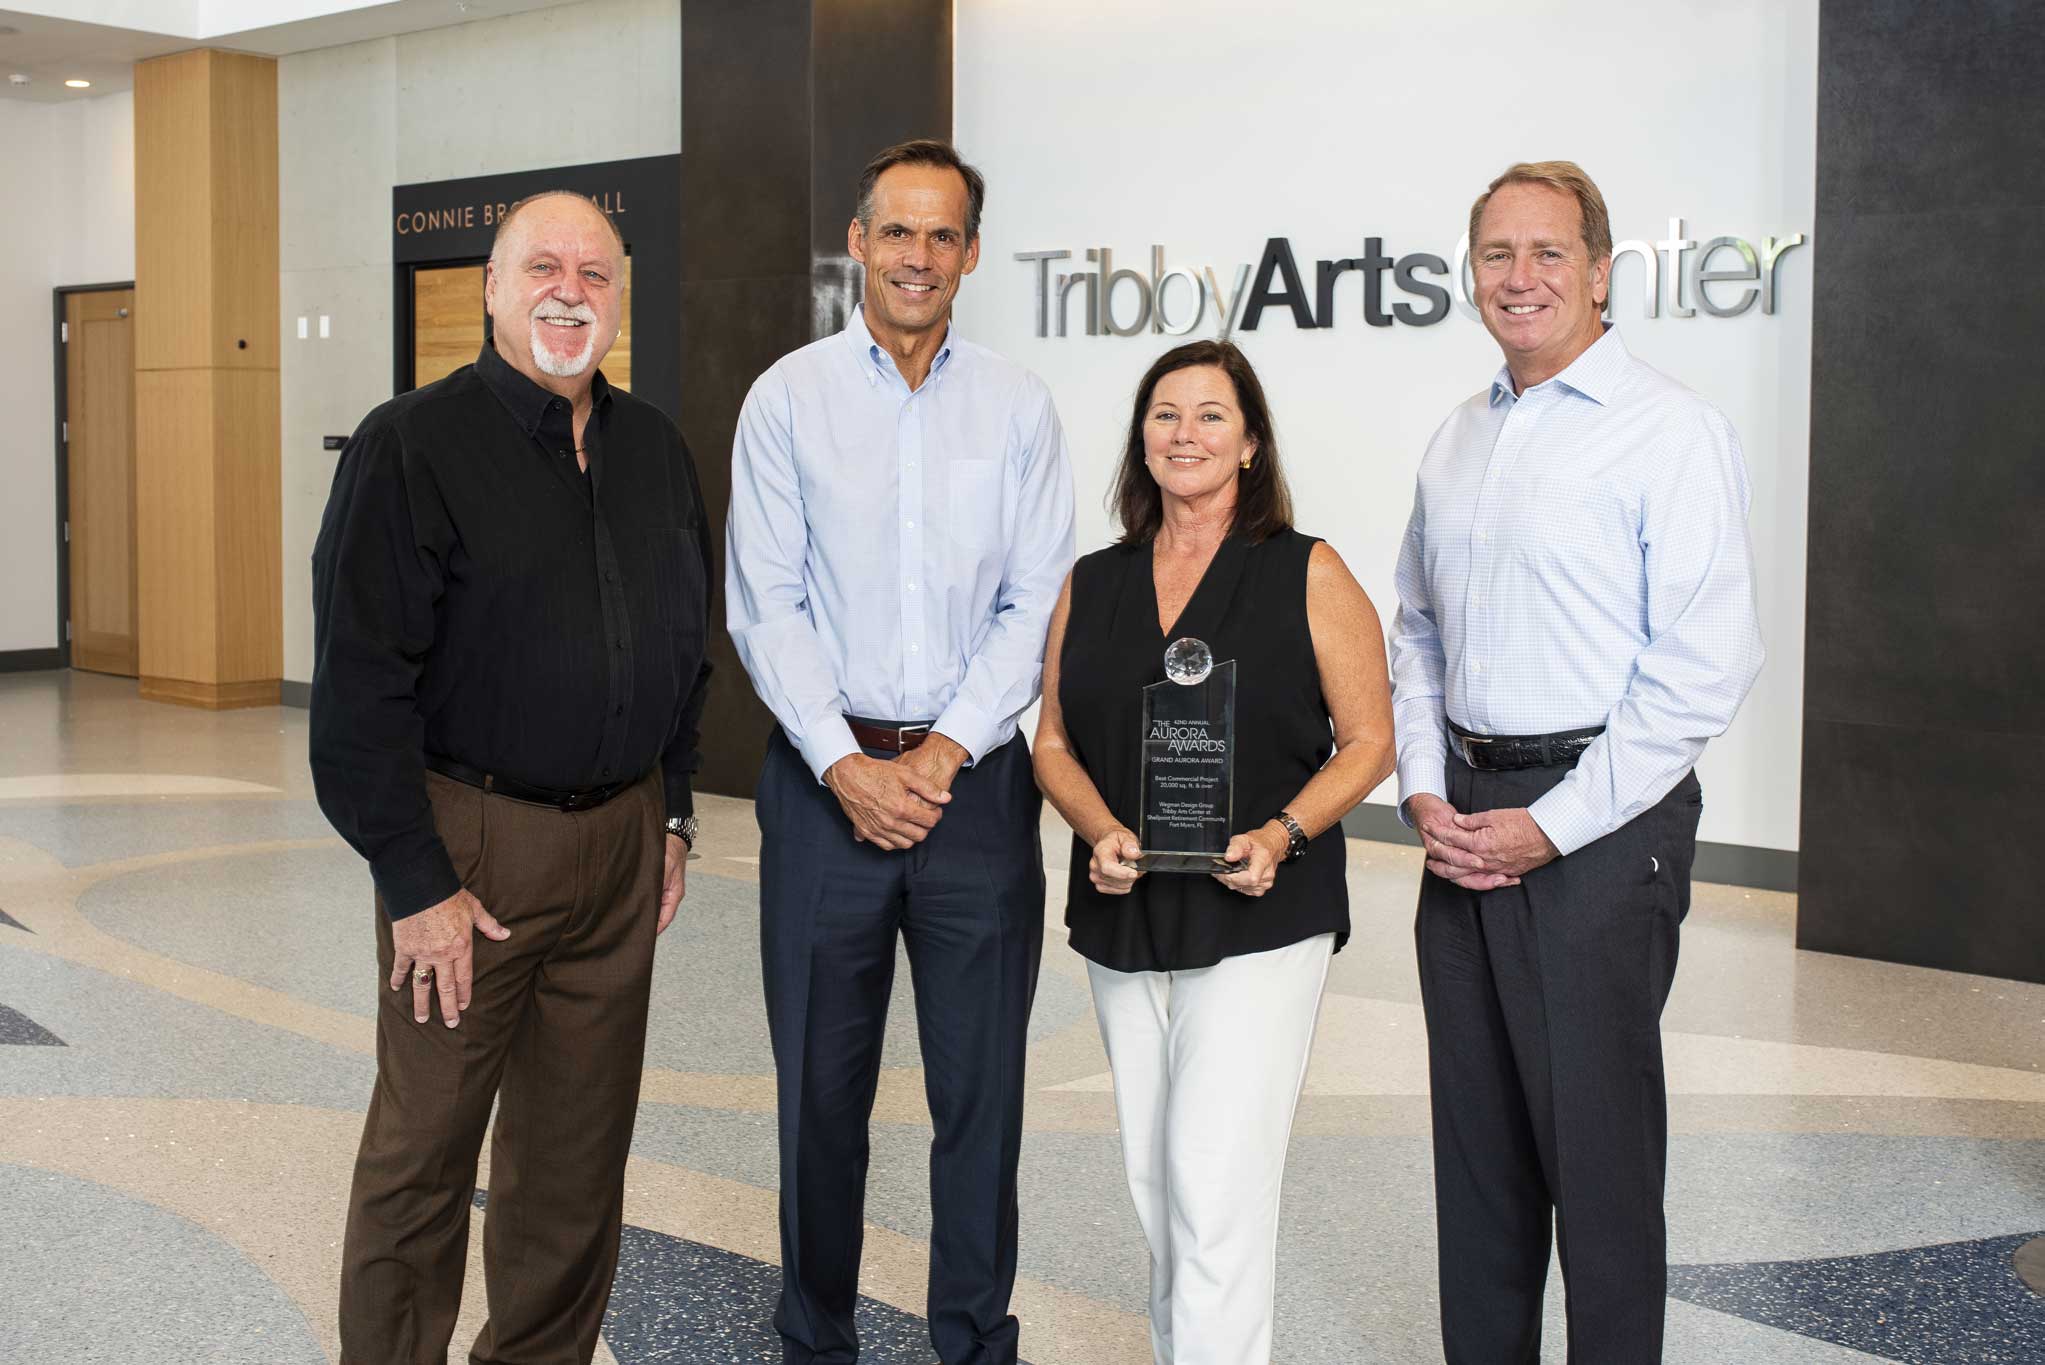 You are currently viewing Tribby Arts Center recognized in coveted design award